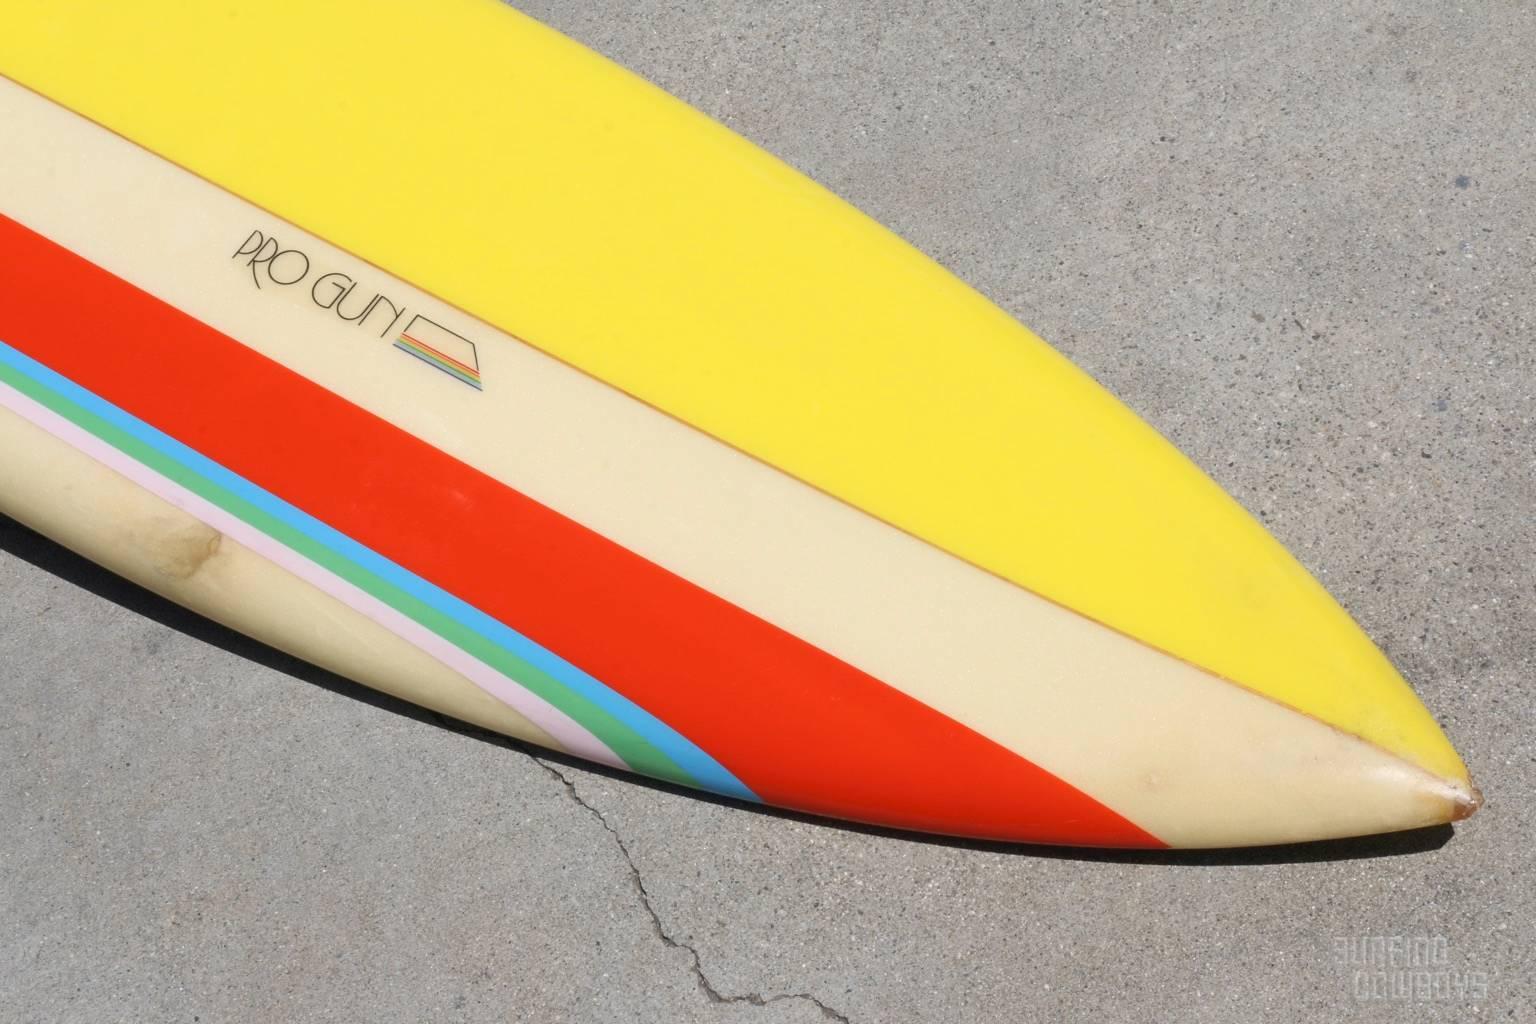 canyon surfboards